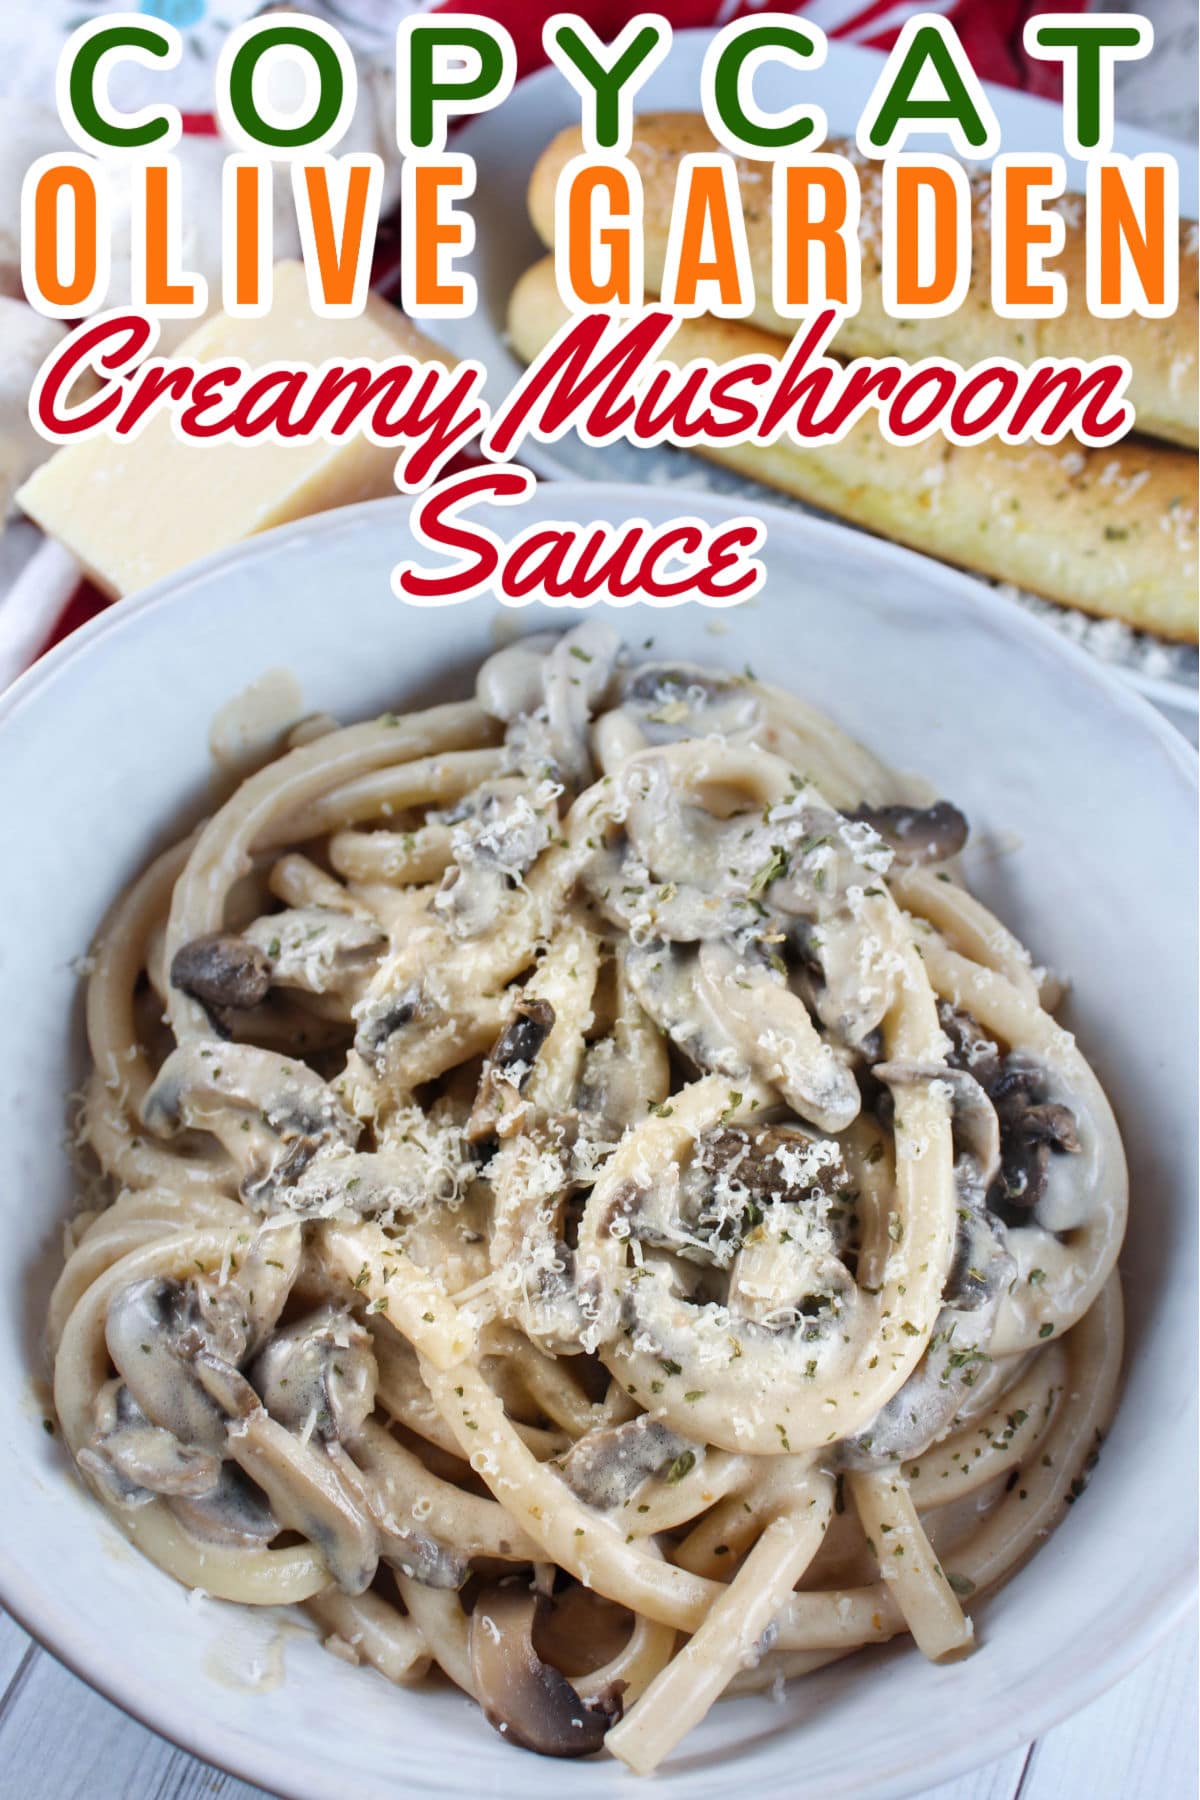 Copycat Olive Garden Creamy Mushroom Sauce takes their classic Alfredo sauce and lightens it up a touch with the addition of lots of mushrooms! It's a perfect weeknight dinner since it's ready in about 10 minutes!  via @foodhussy